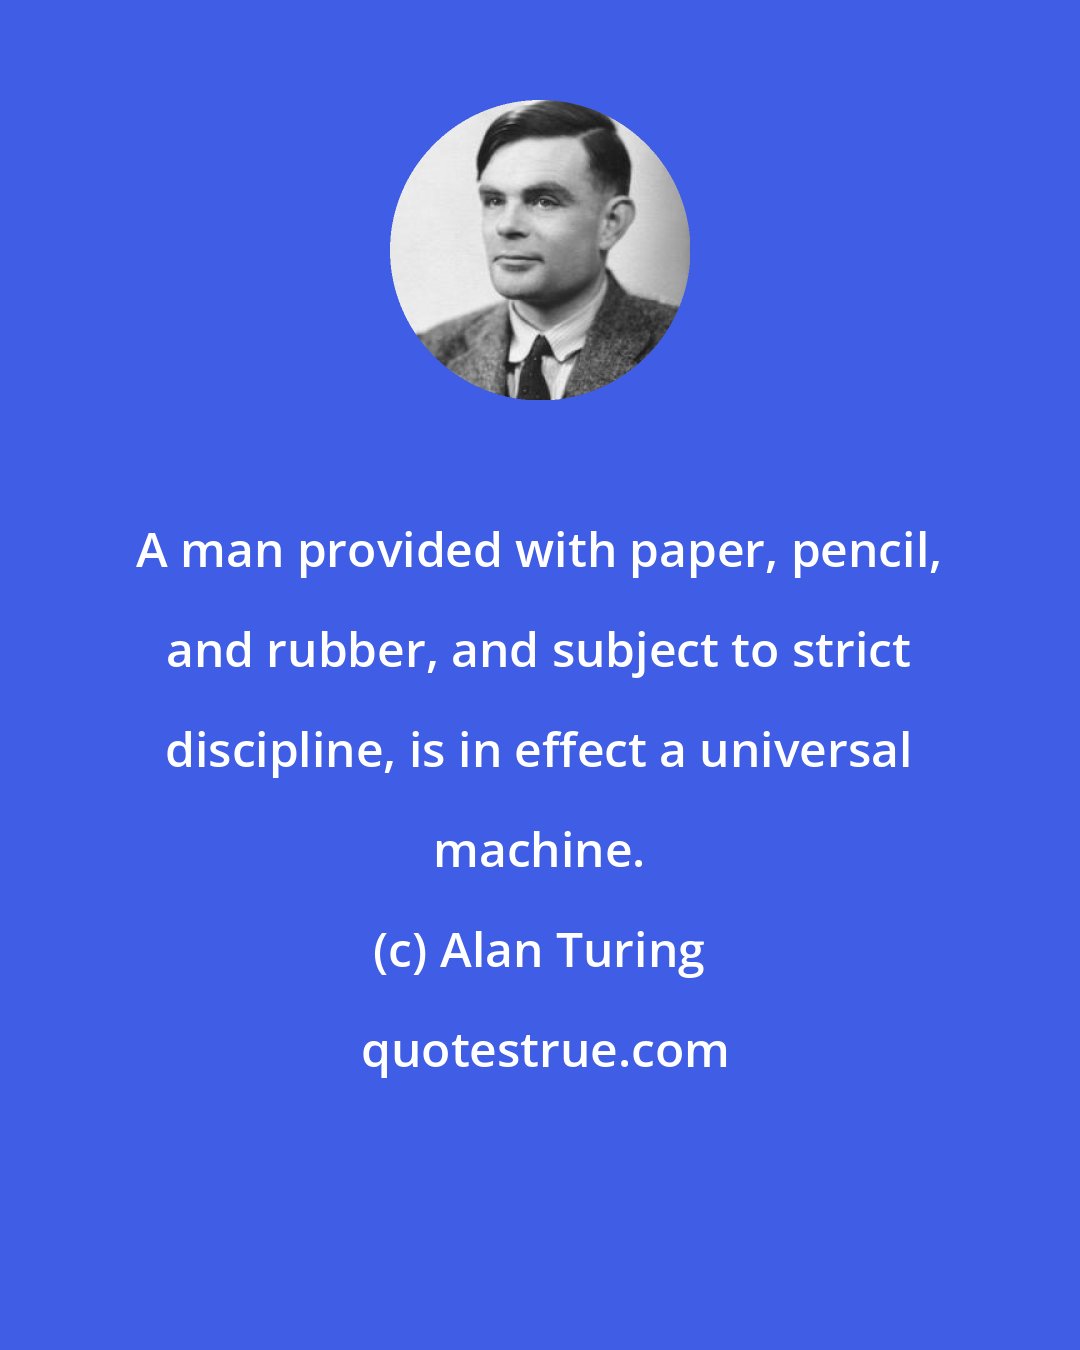 Alan Turing: A man provided with paper, pencil, and rubber, and subject to strict discipline, is in effect a universal machine.